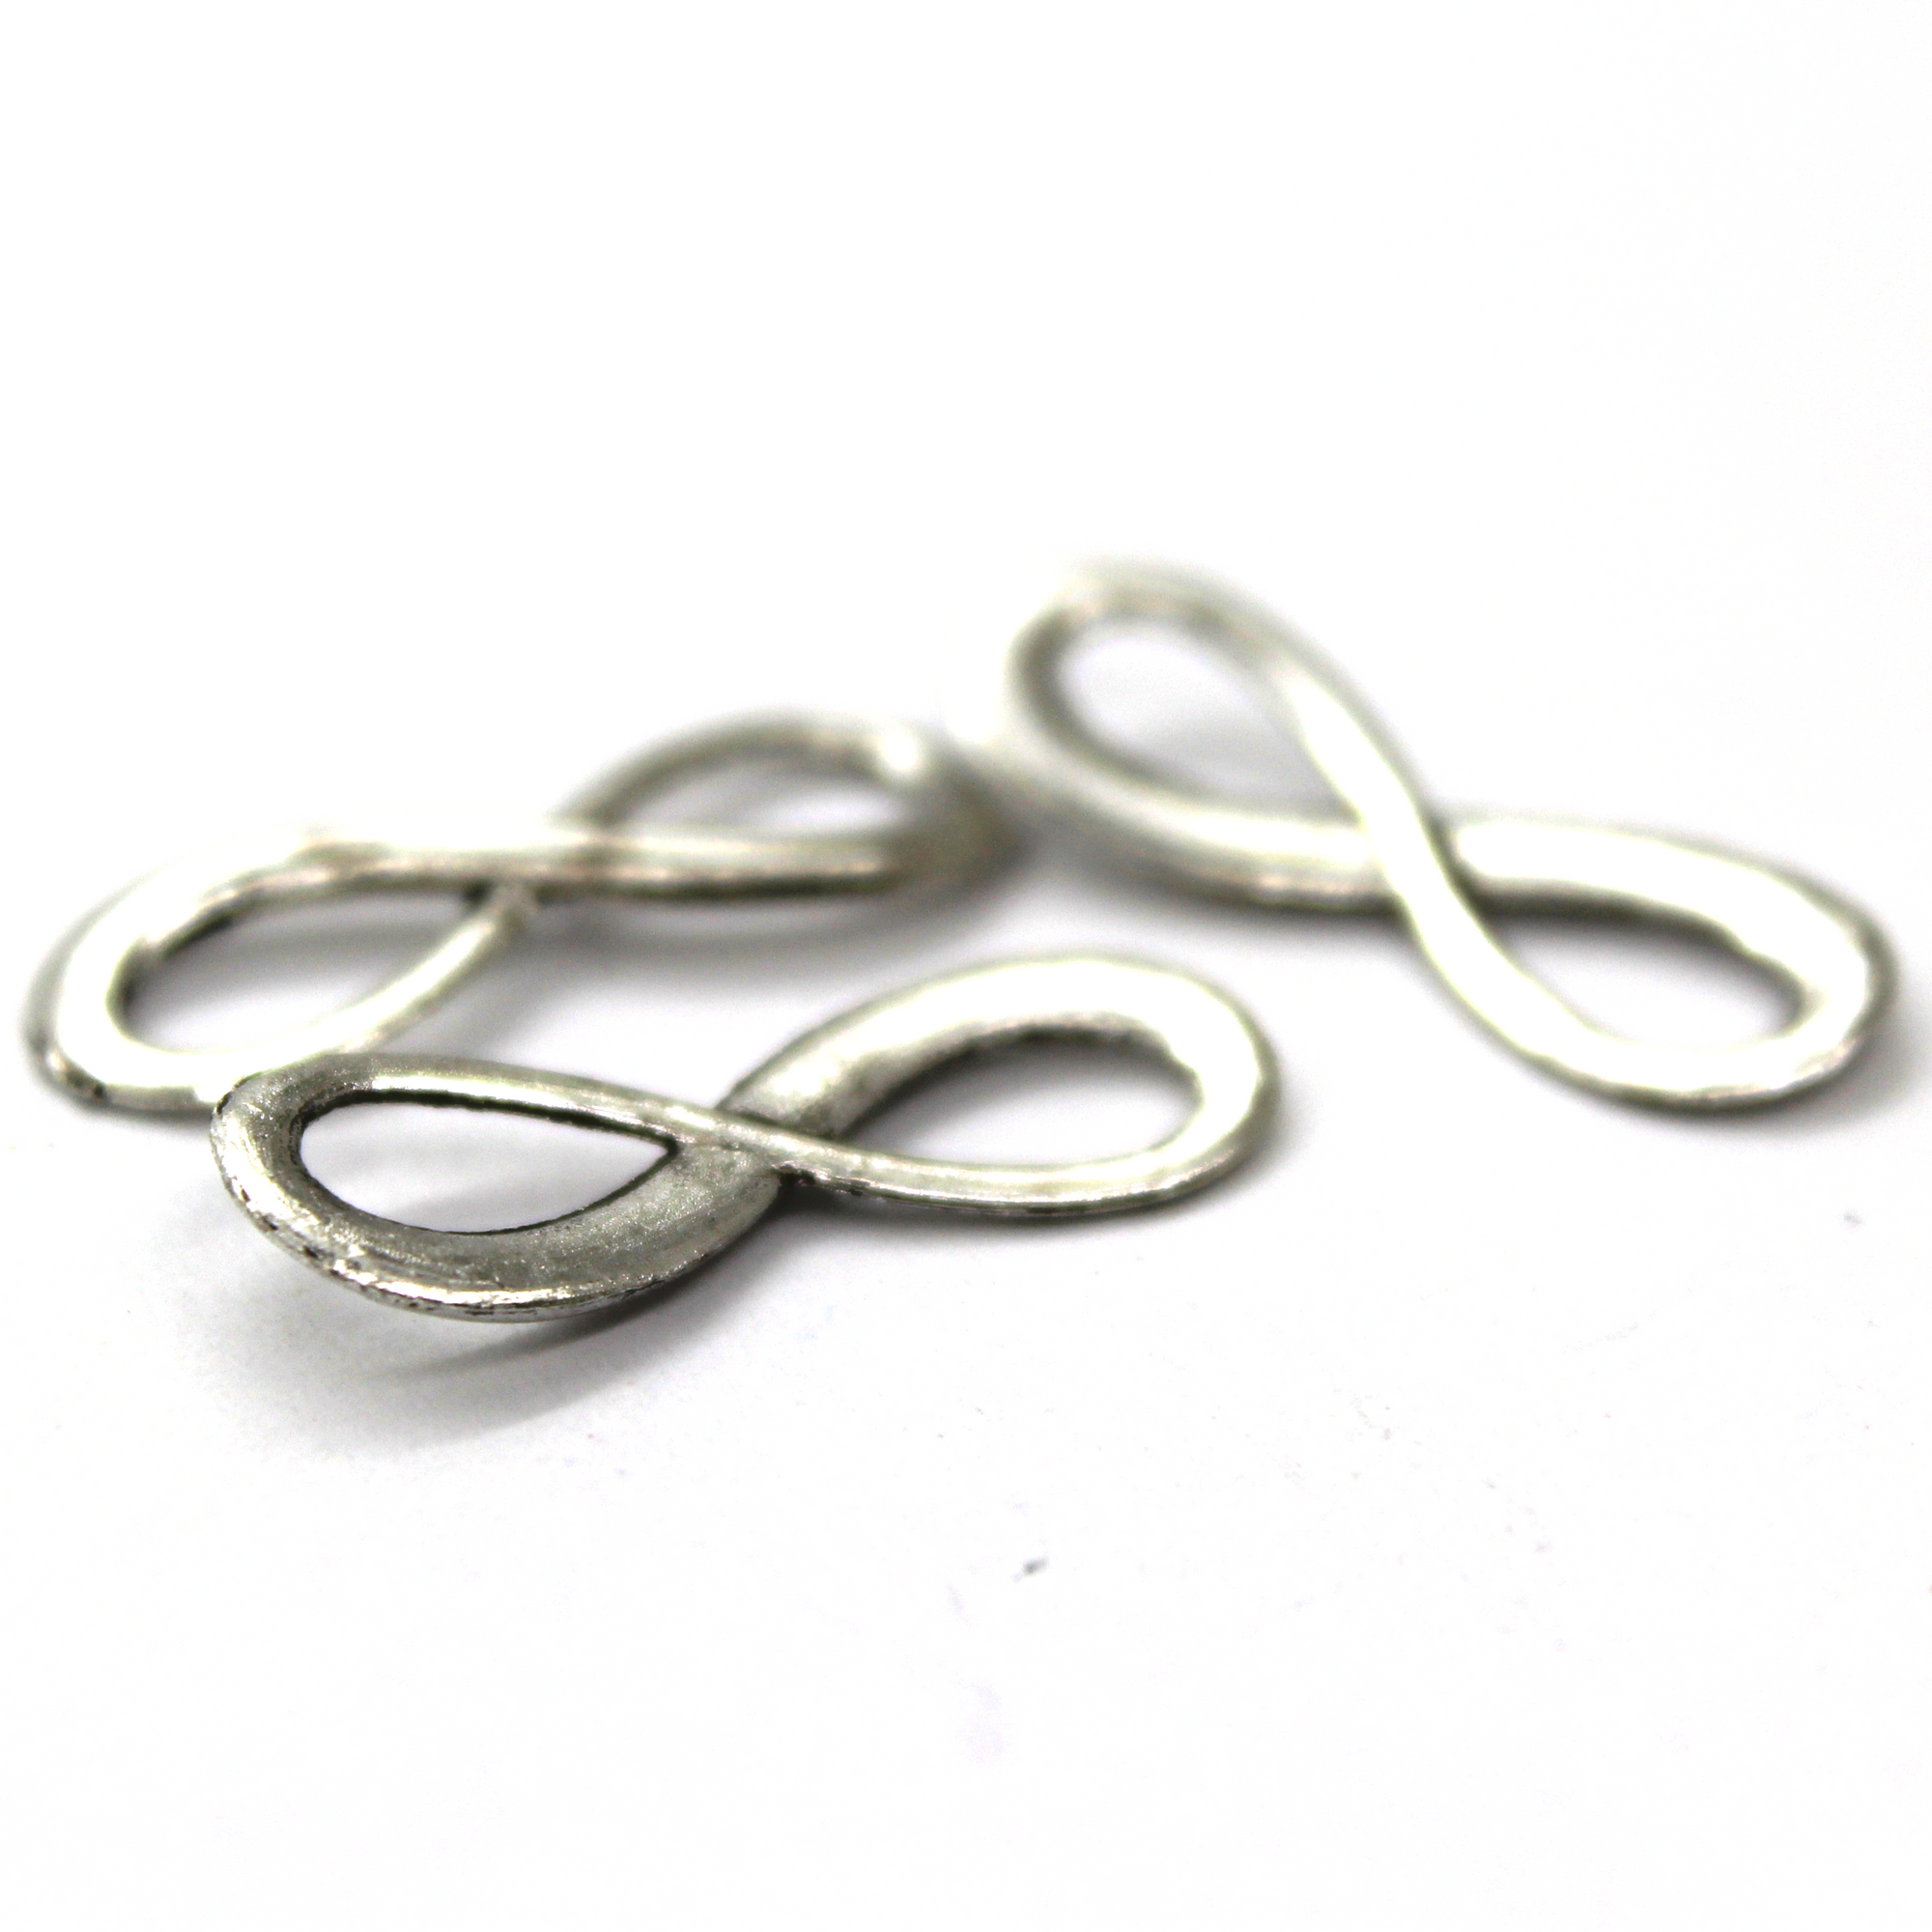 Connector, Curved Infinity, Silver, Alloy, 23mm x 8mm, Sold Per pkg of 6